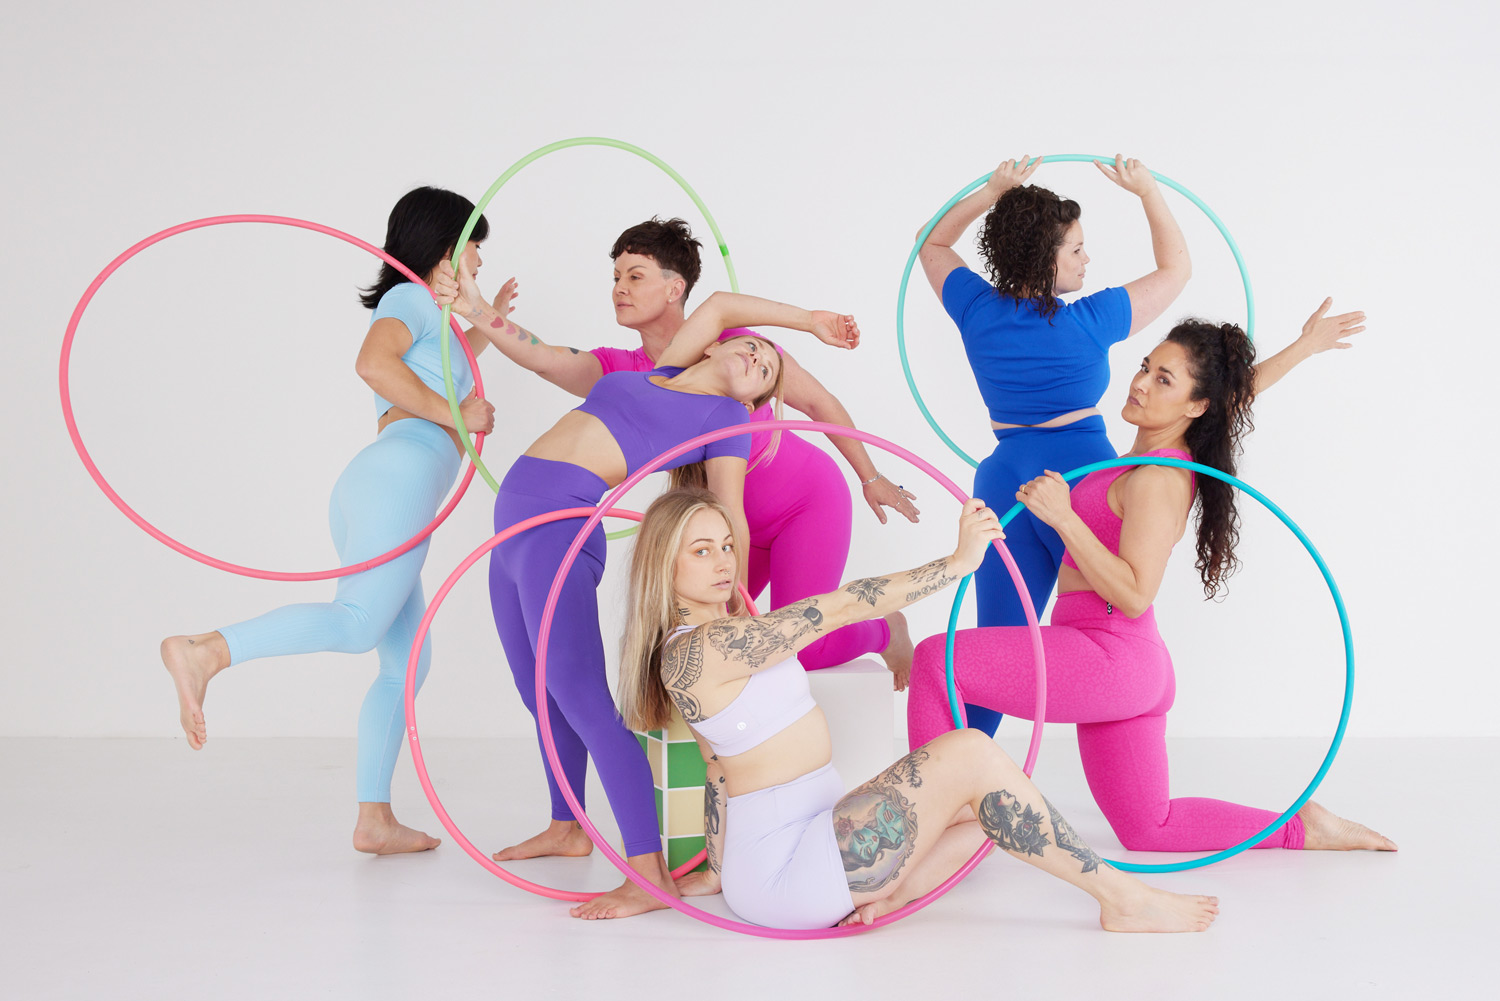 Lean how to hoopdance flow in 30 days free challenge